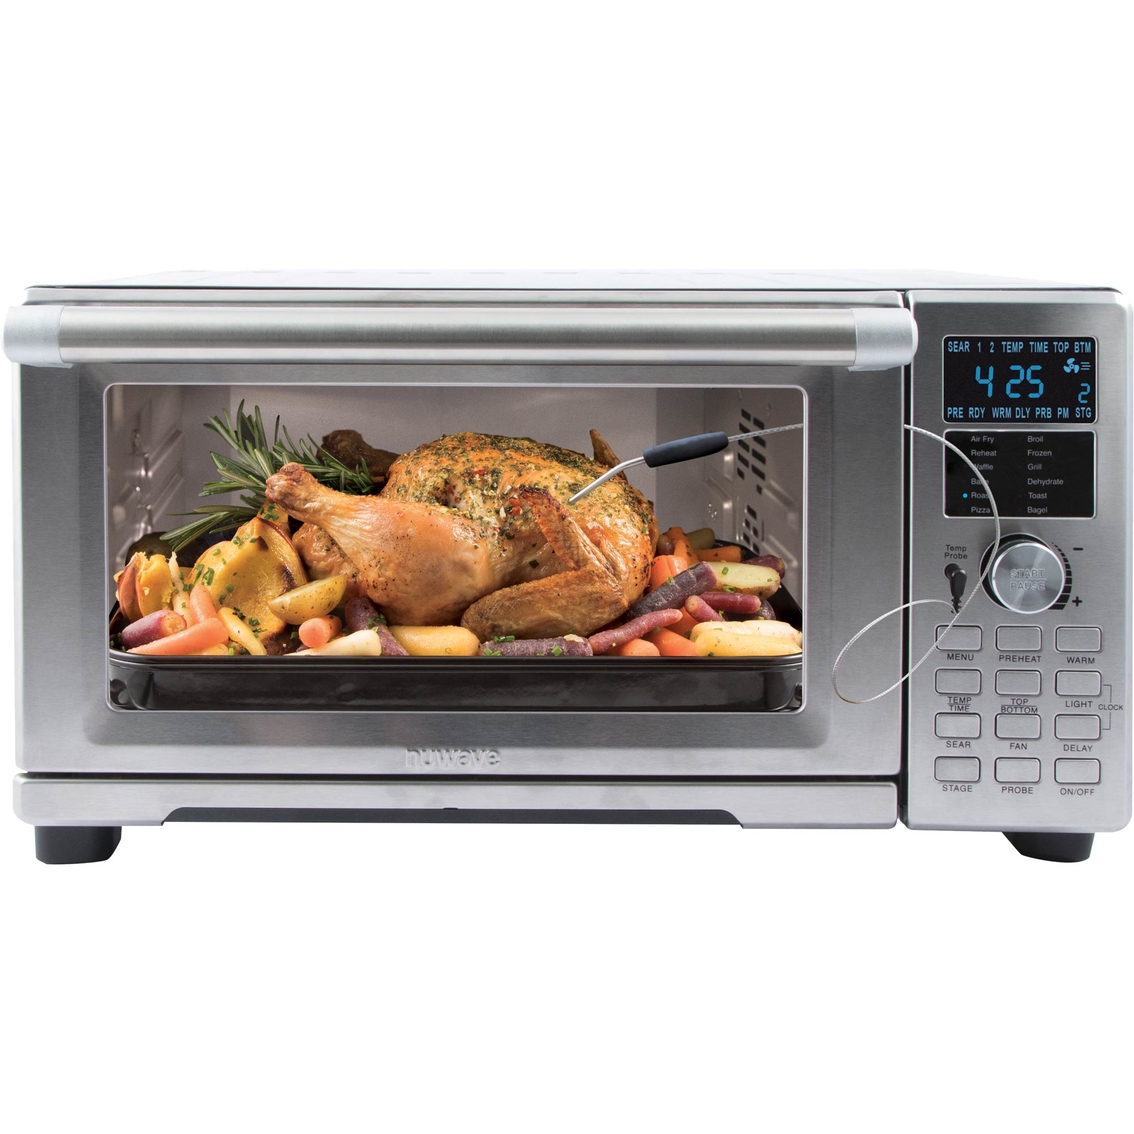 NuWave Bravo XL Convection Oven - Image 2 of 4